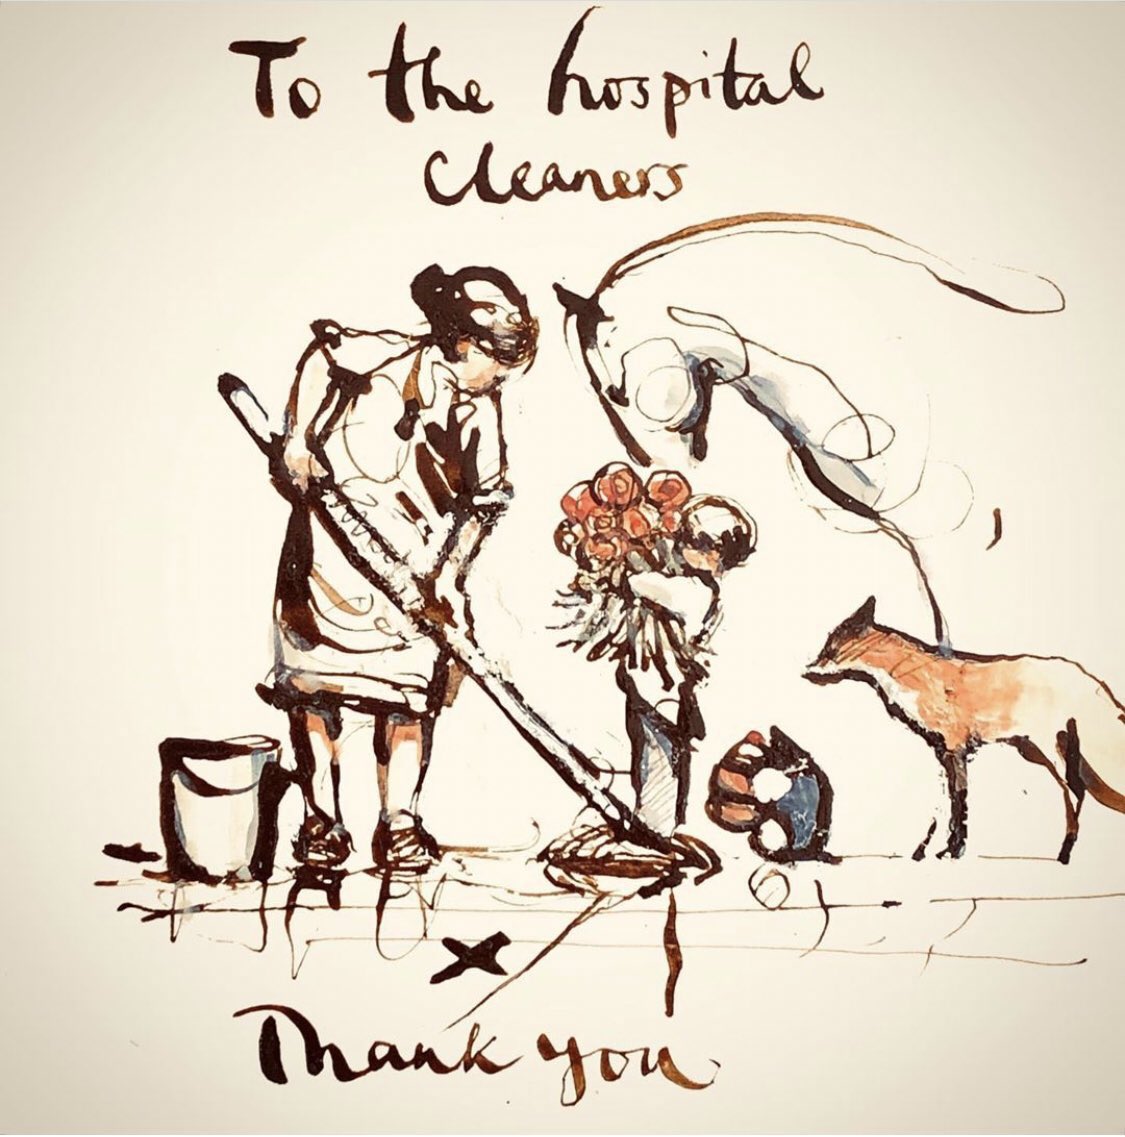 NHS cleaners rarely get any recognition, but they have done a phenomenal job over the past 12 months. Please RT for all of them.